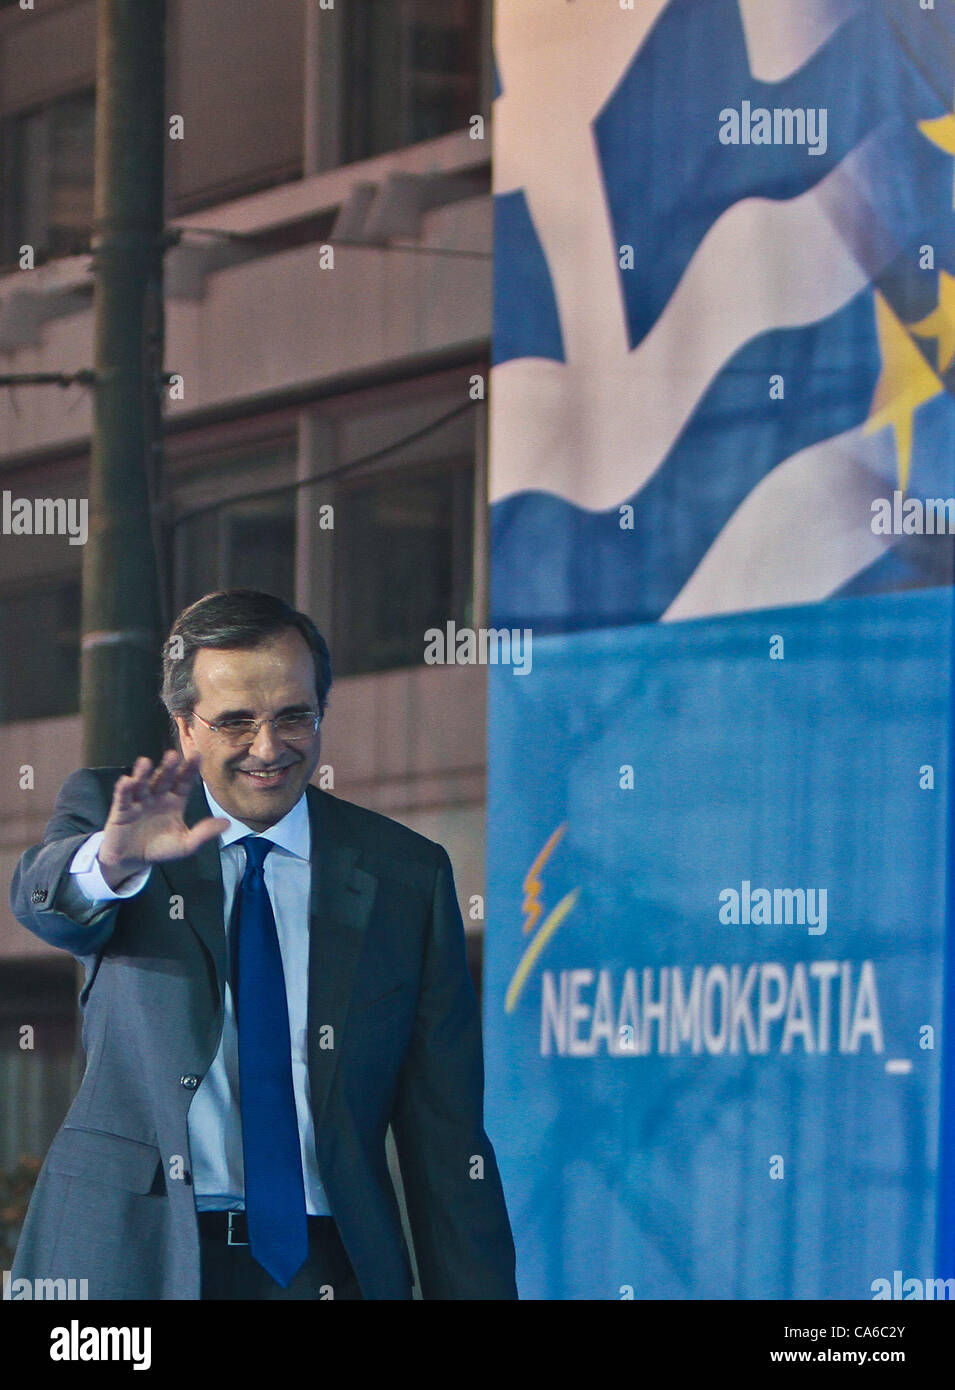 June 15, 2012 - Athens, Greece - New Democracy party leader, Antonis Samaras, waves to his supporters at the end of his speech in front of the Greek parliament in central Athens on June 15, 2012. As Greece heads for a momentous electoral battle that could decide whether it stays in the eurozone, par Stock Photo